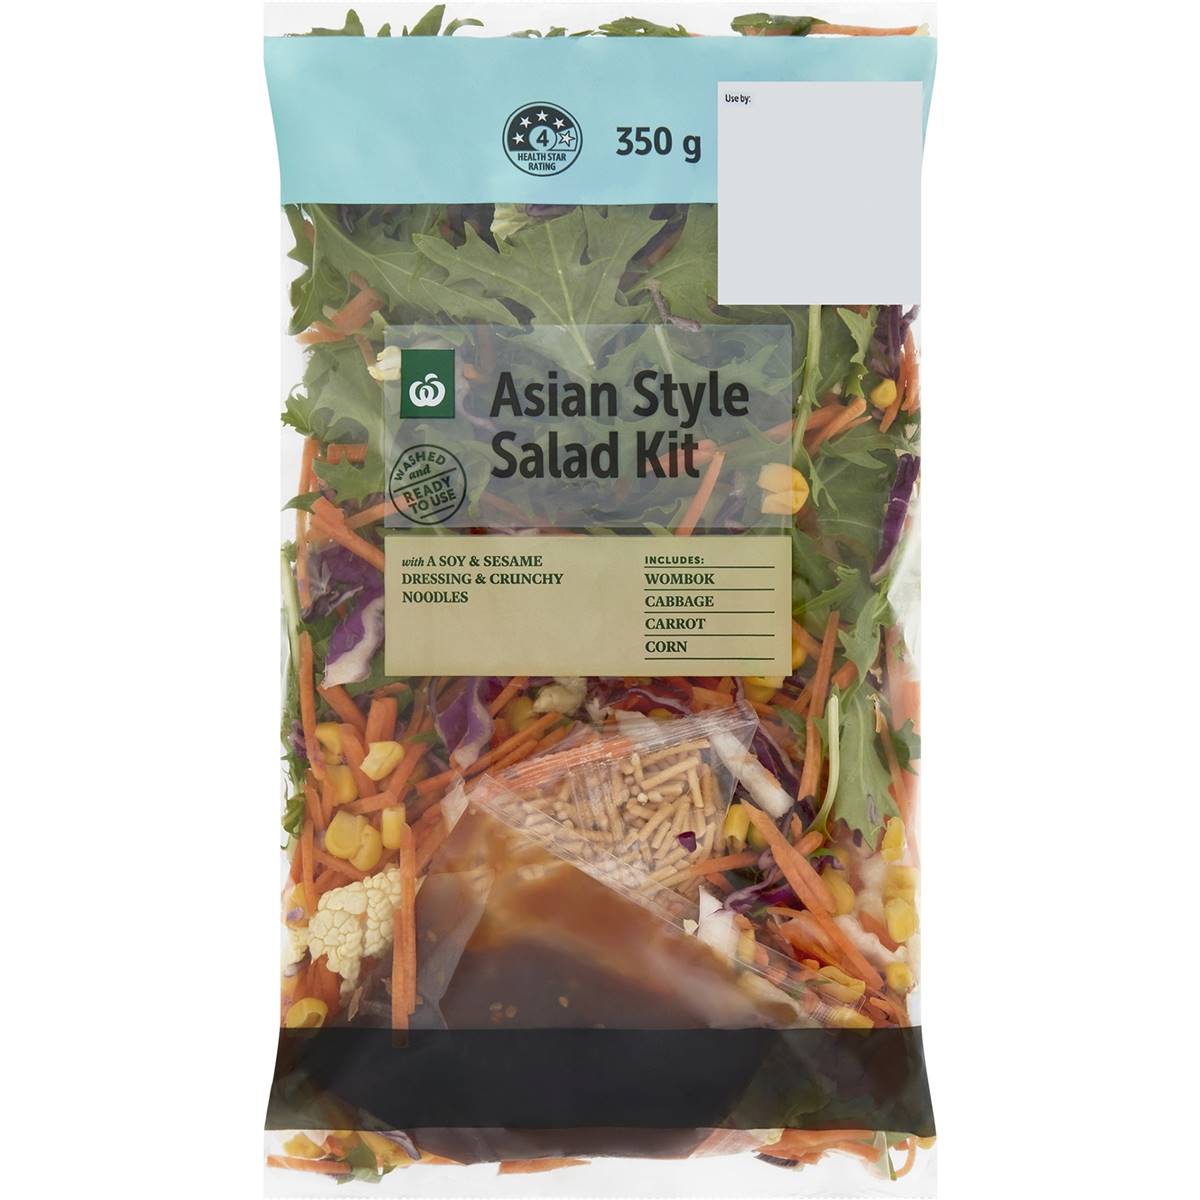 Calories in Woolworths Asian Style Salad Kit